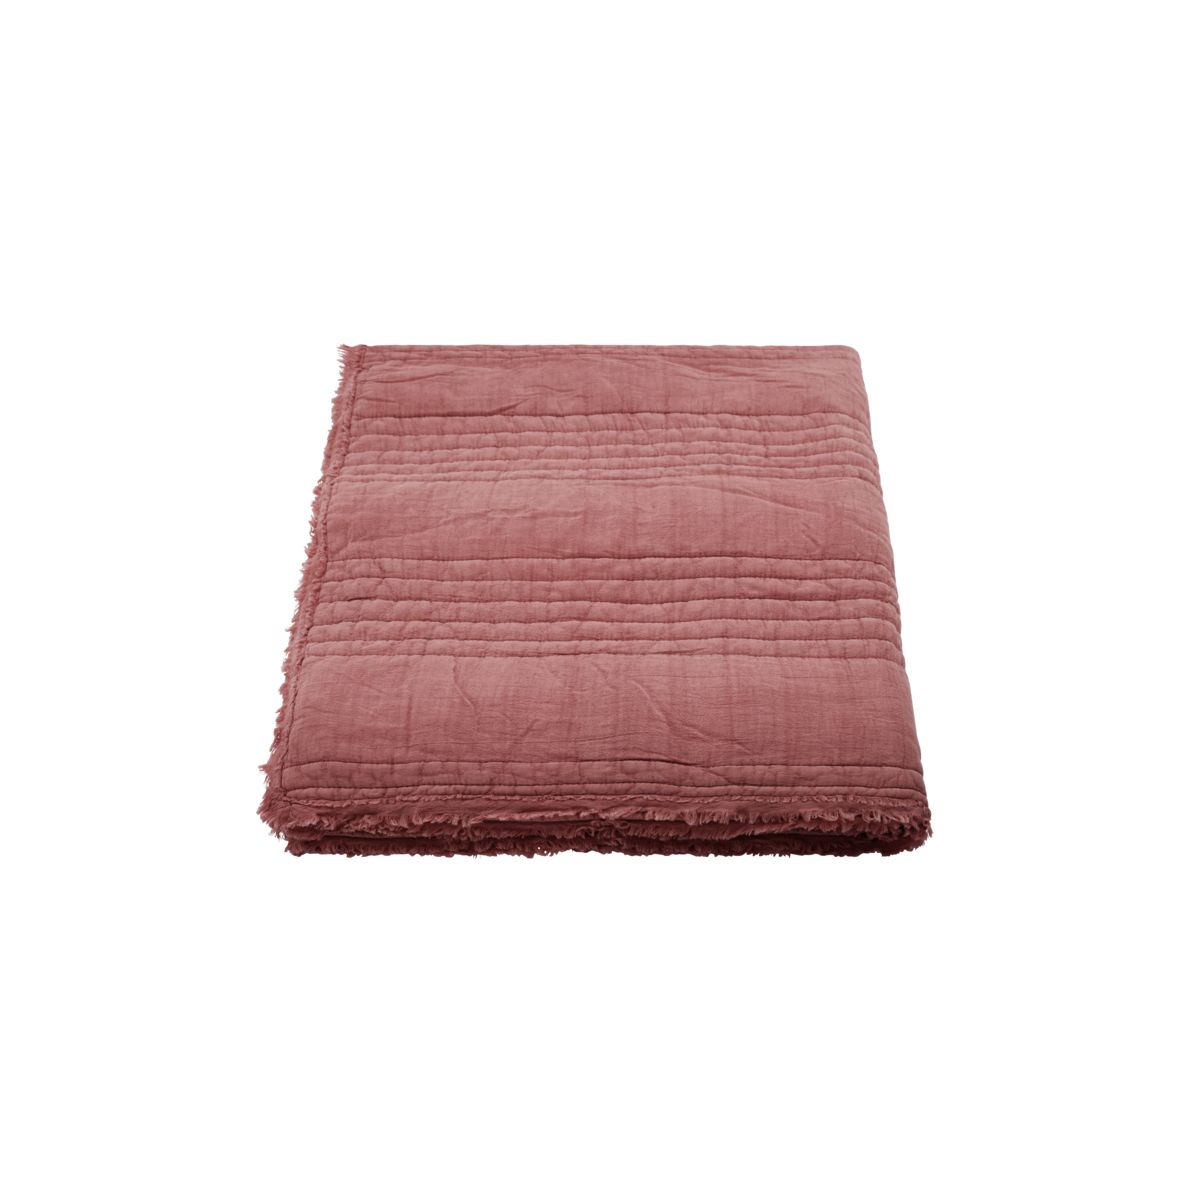 #1 - Quilt, Ruffle, Dusty berry